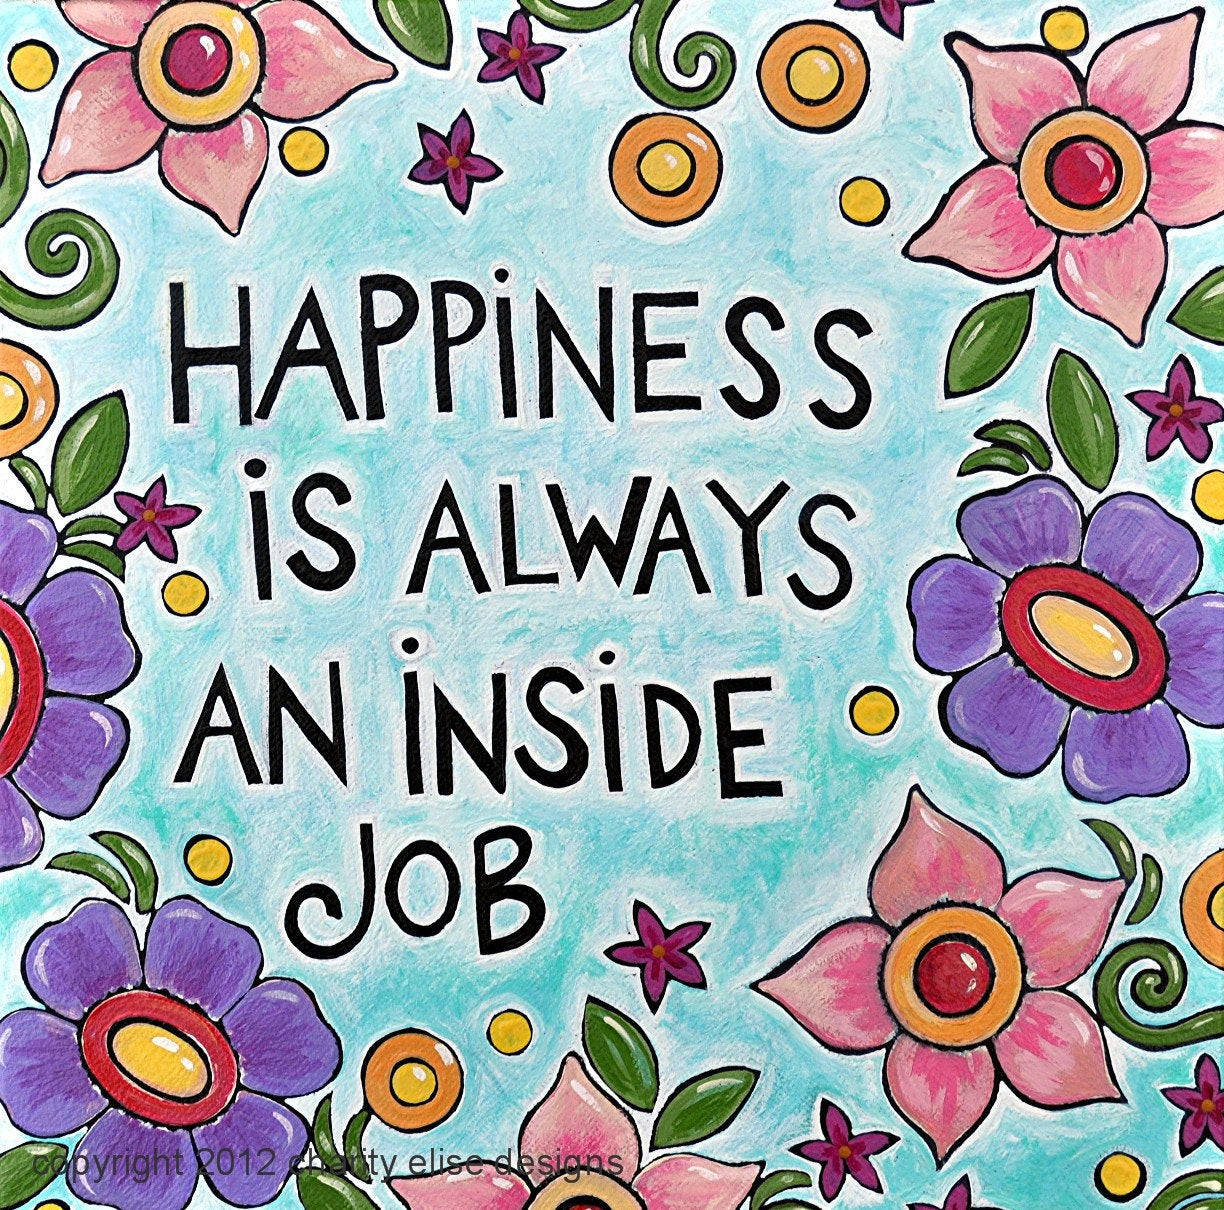 Inspirational Quotes Happiness
 Colorful Art Print with Inspirational Quote Happiness